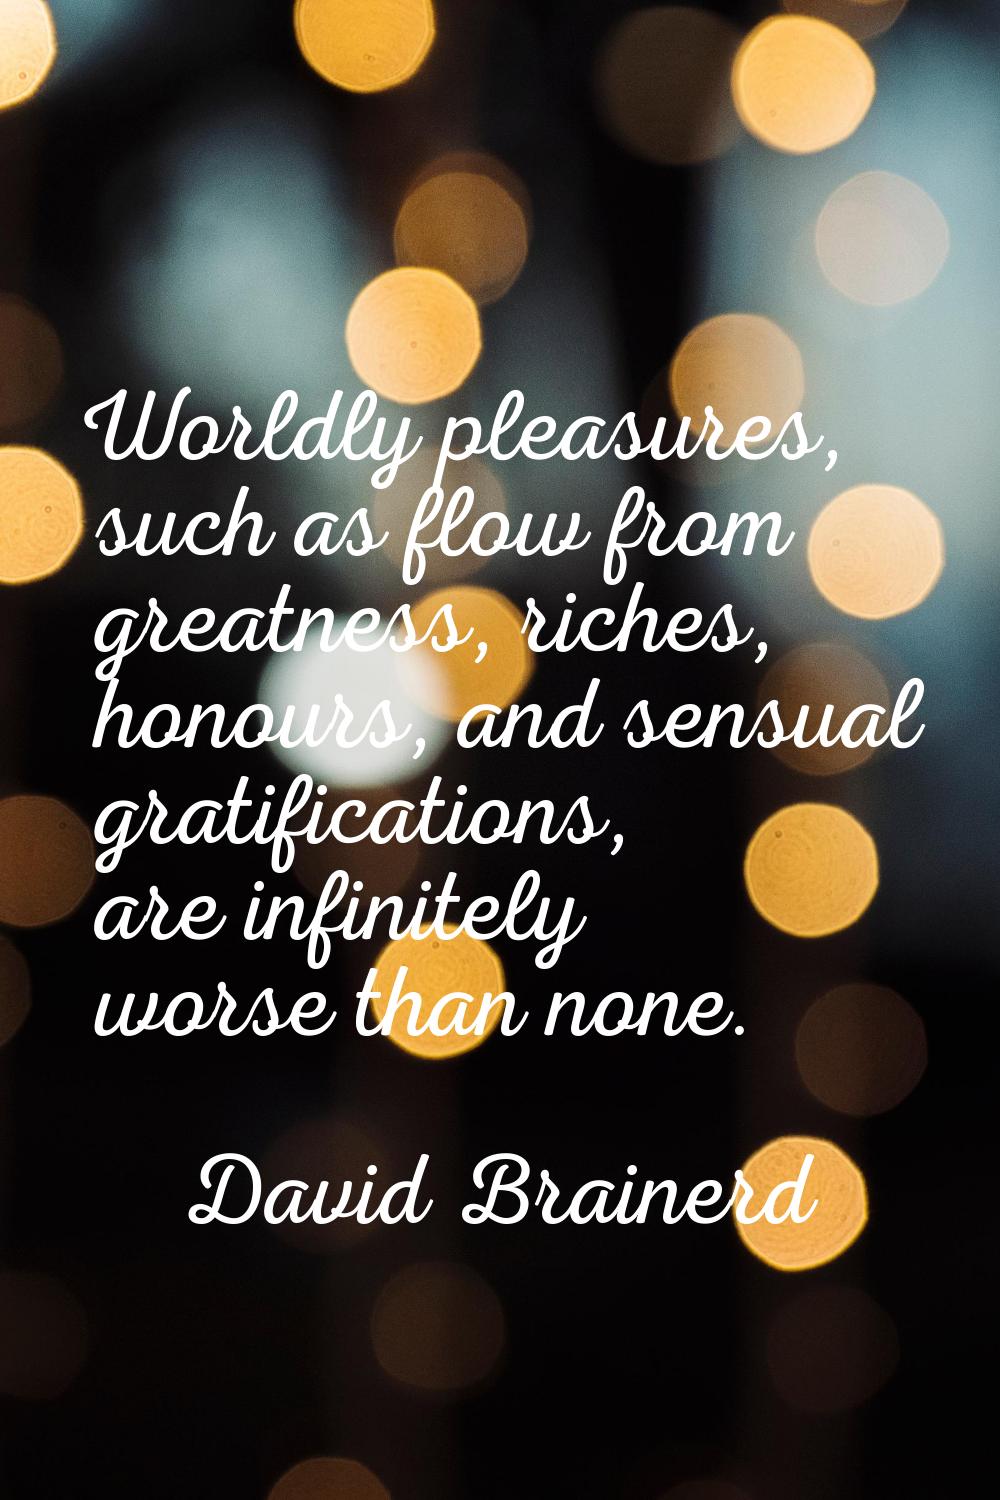 Worldly pleasures, such as flow from greatness, riches, honours, and sensual gratifications, are in